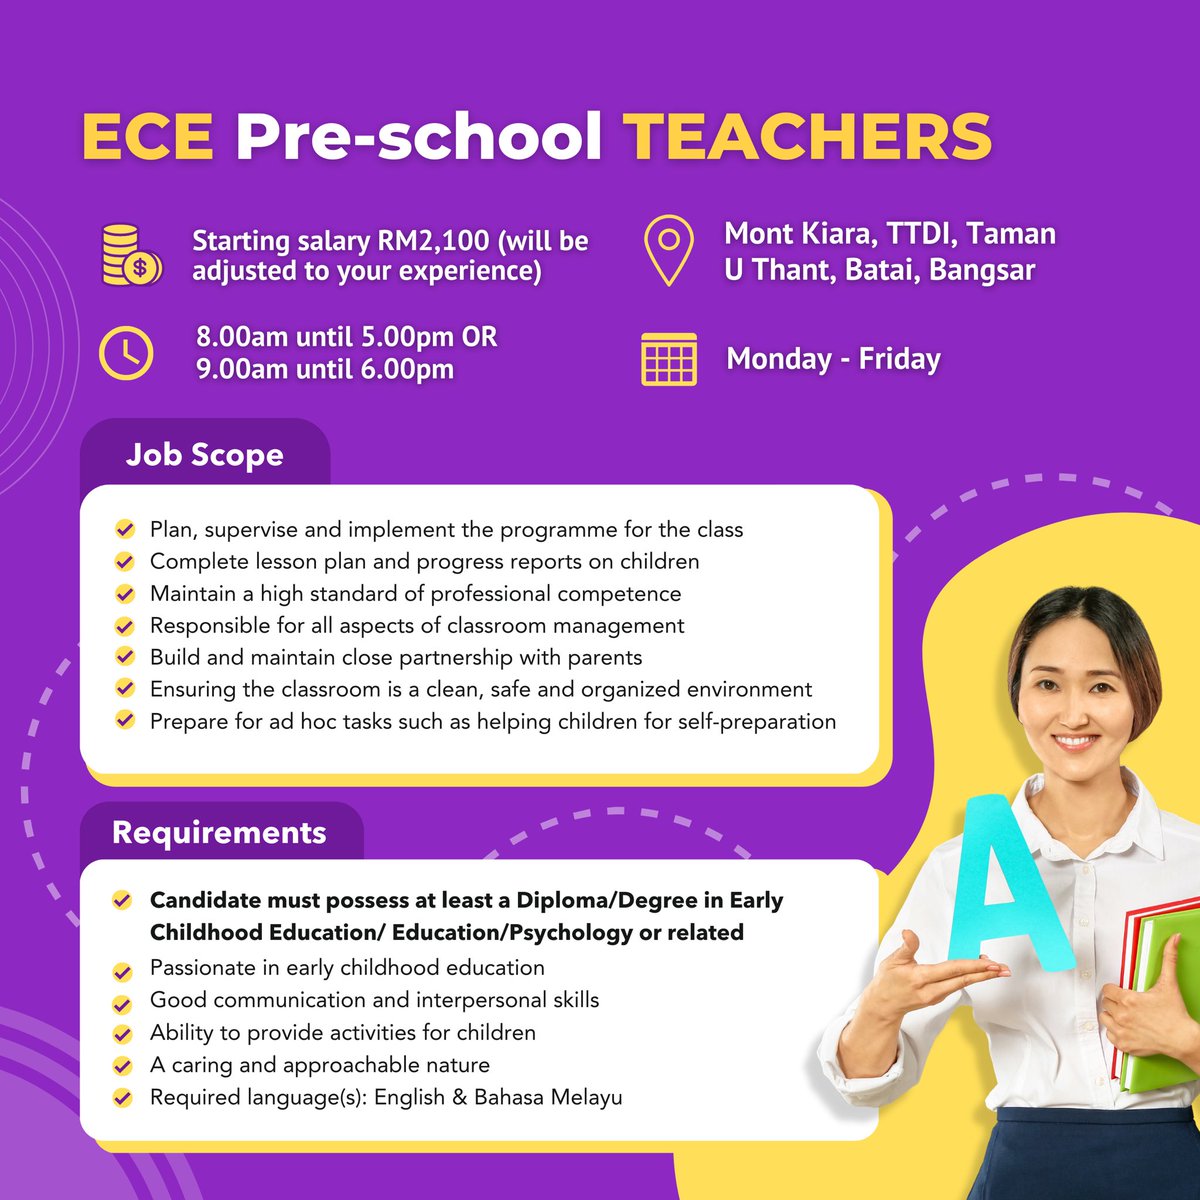 🍎 URGENT HIRING 🍎 We're looking for Early Childhood Education (ECE) Teachers! 💰 Starts from RM2,100 - above (Depending on your experience) 👉 Apply now: bit.ly/QworkTeaching #jobmalaysia #nakkerja #jawatankosong #carikerja